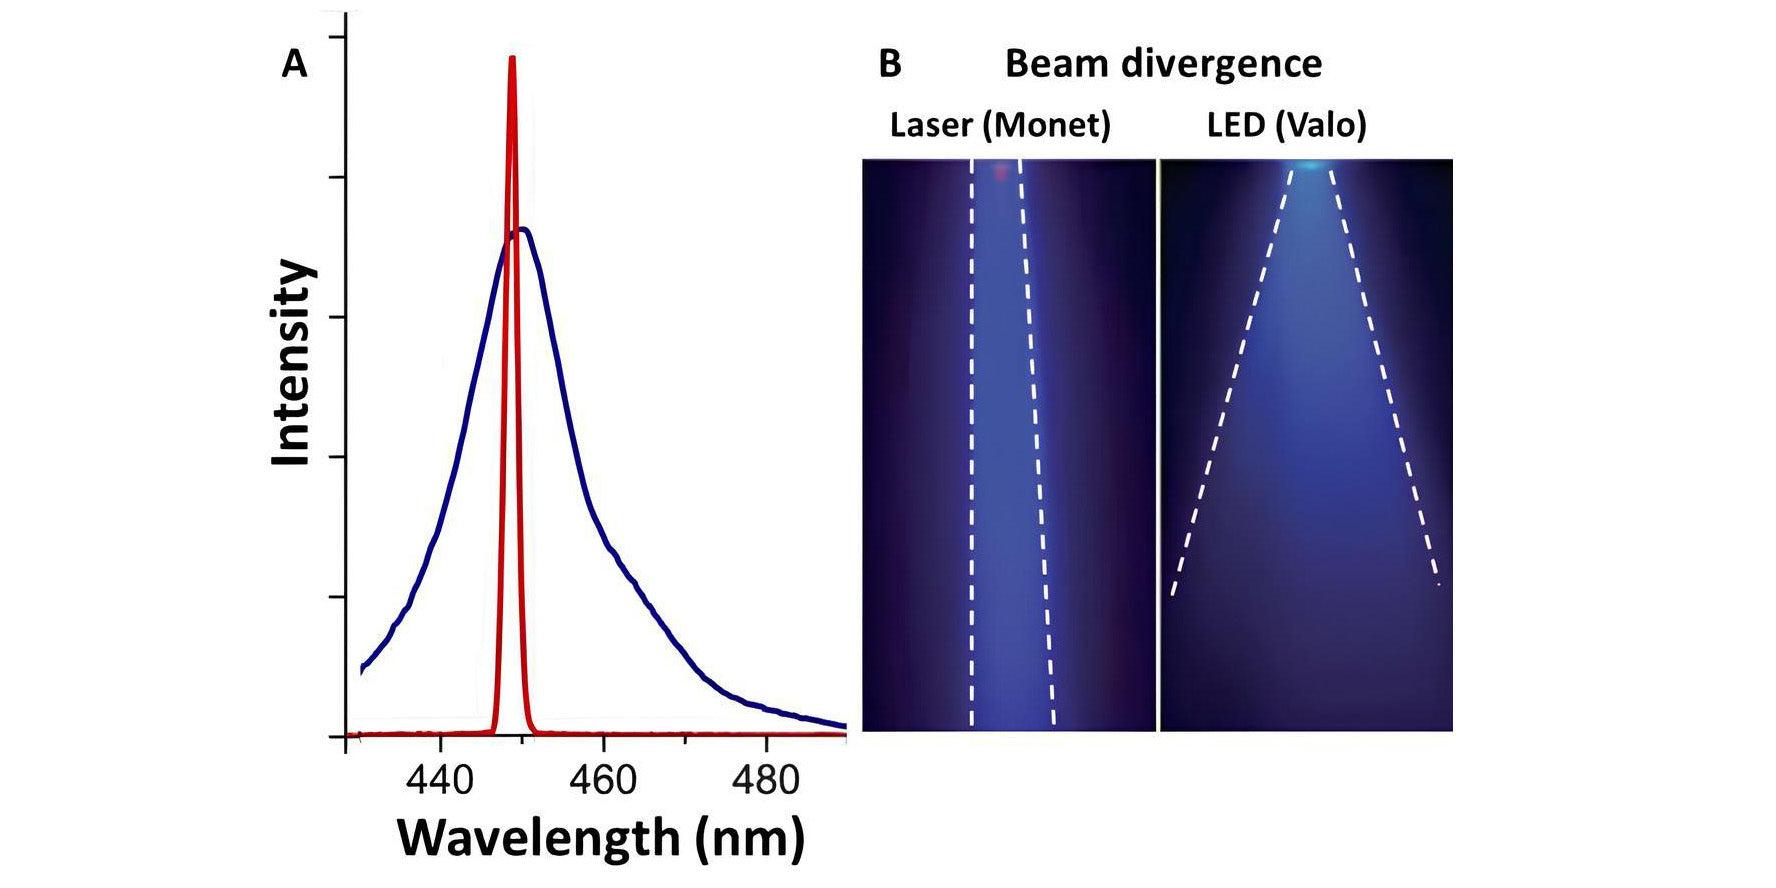 Shining a light on blue diode laser curing - amdlasers